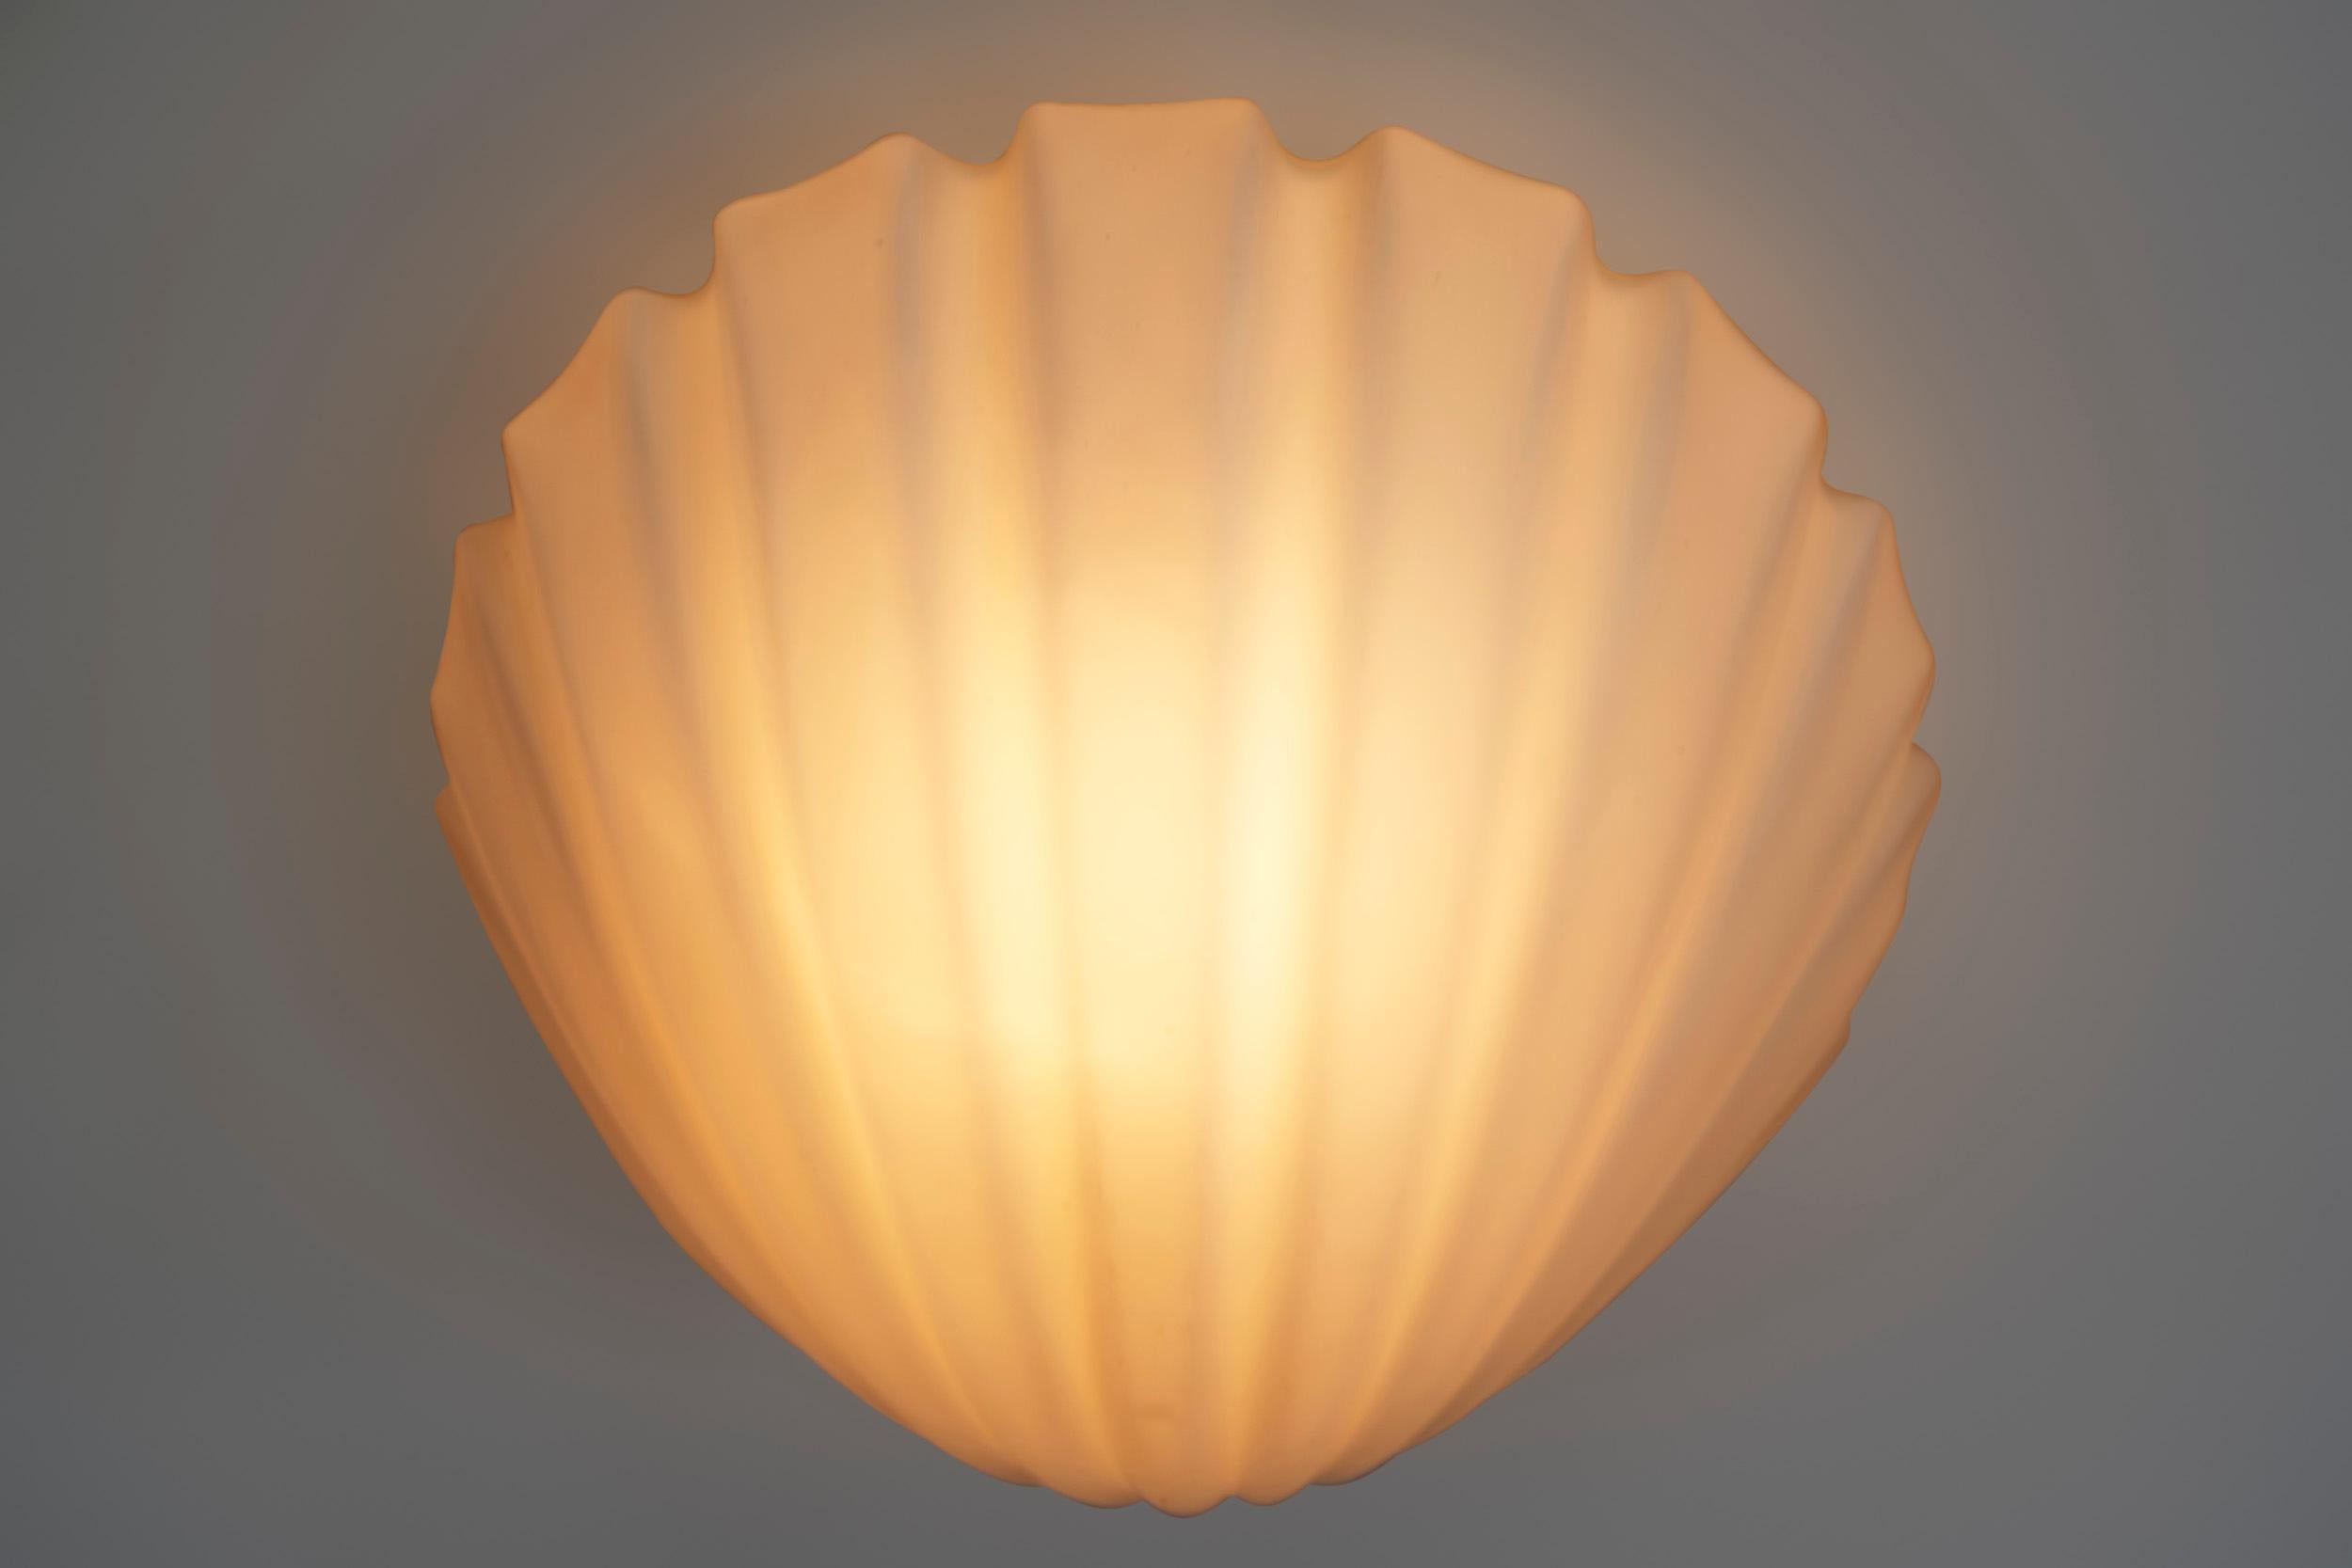 Pair of Opal Glass Seashell Wall Lamps by Glashütte Limburg, Germany 1970s For Sale 4